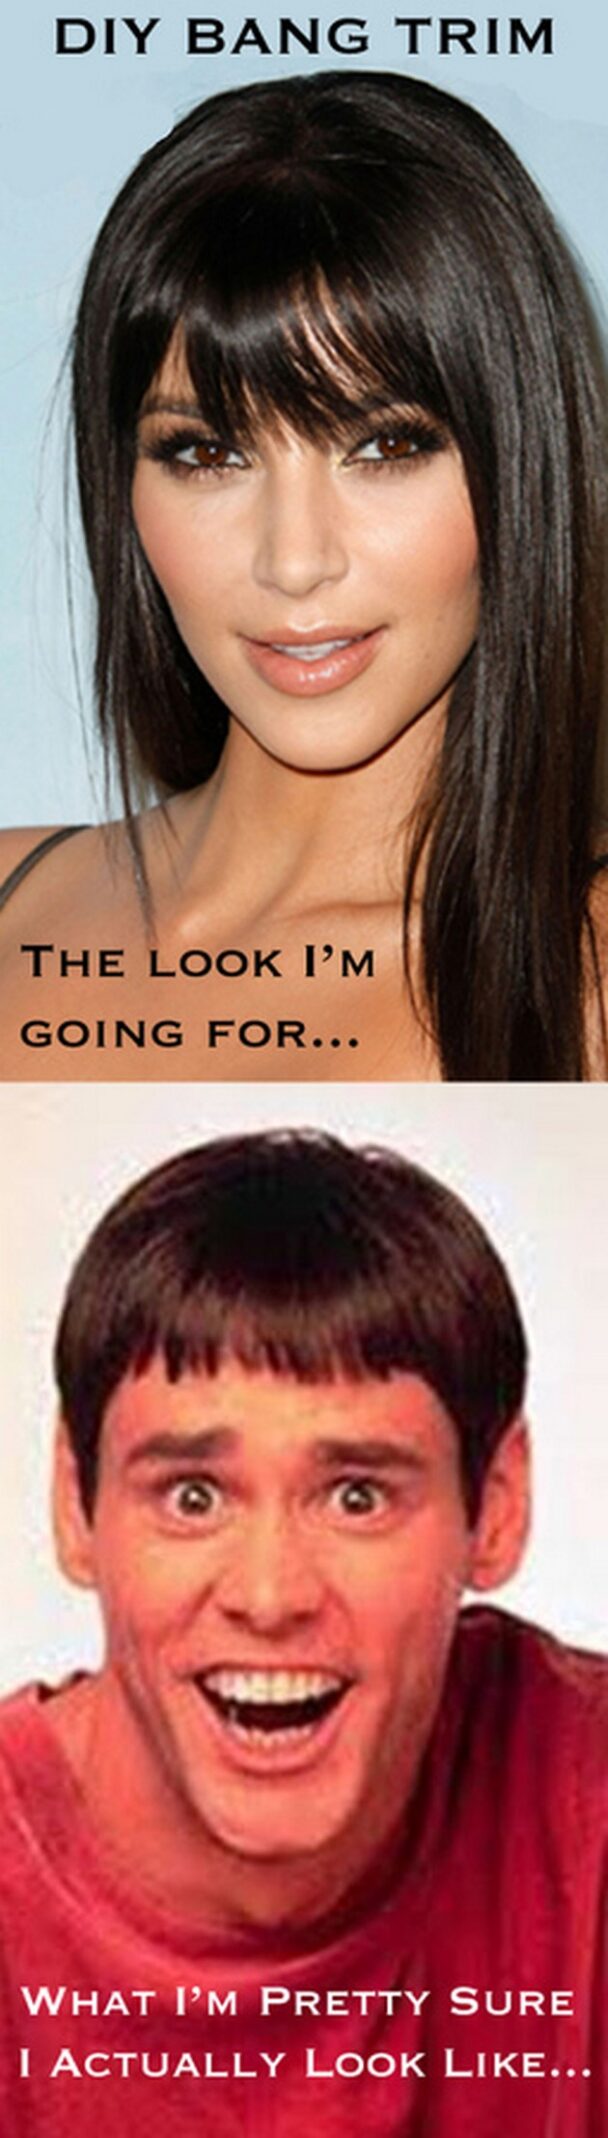 Diy Bang Trim The Look Im Going For What Im Pretty Sure I Actually Look Like